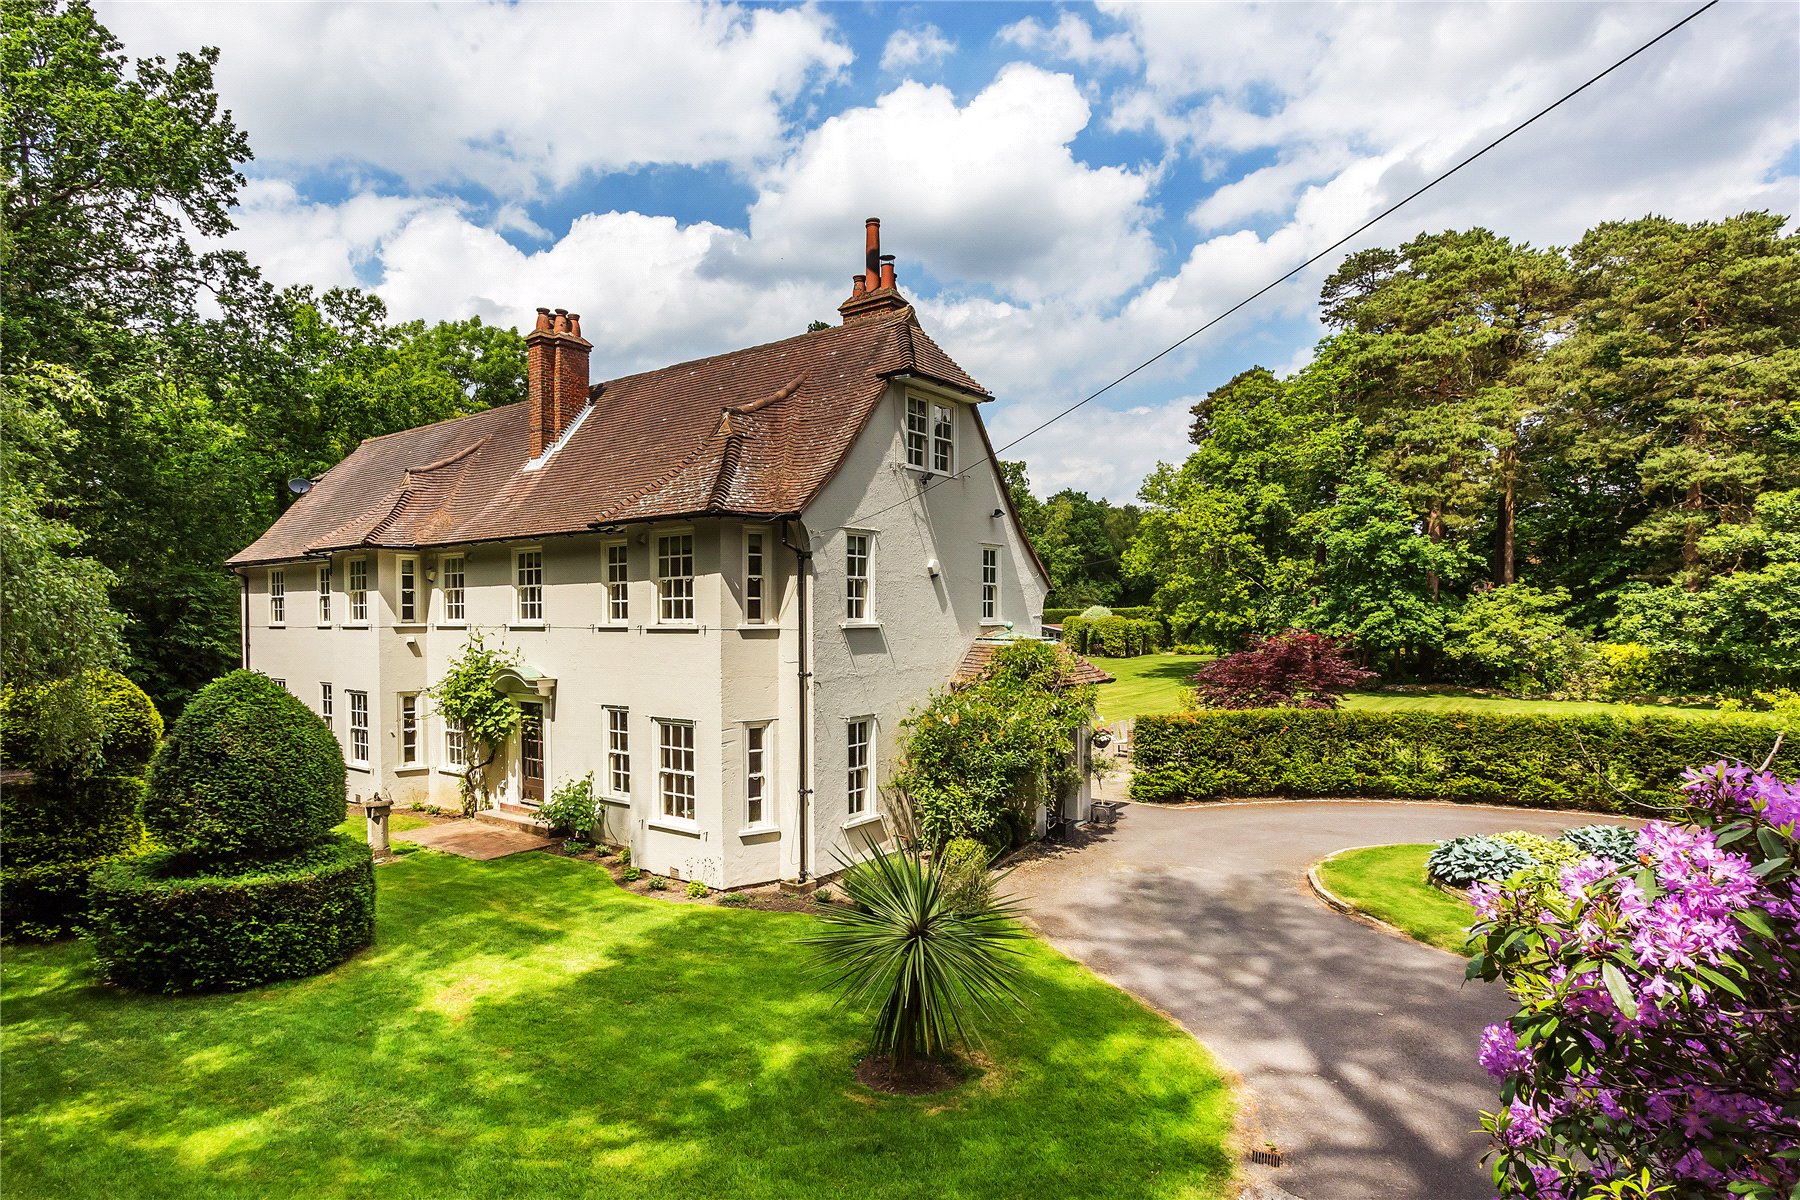 Property for sale in Worplesdon Hill, Surrey - Guide Price £2,850,000